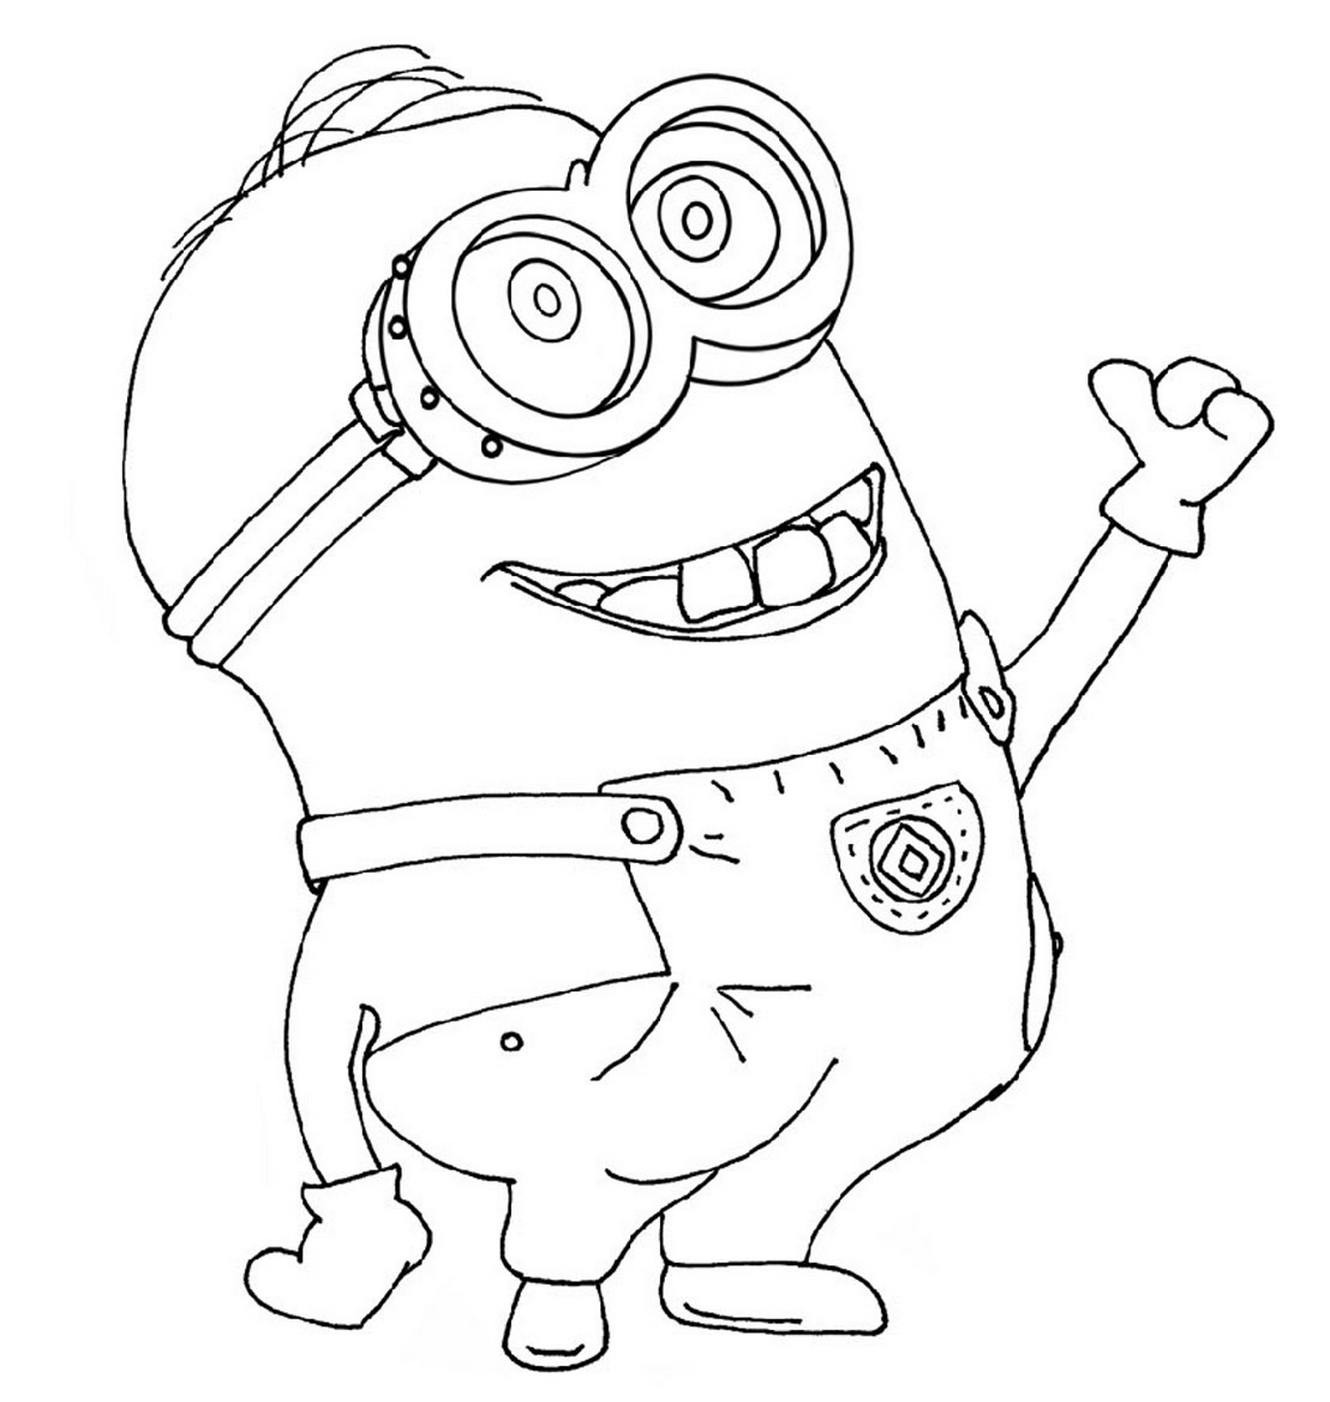 Free Printable Coloring Sheets For Boys
 coloring pages for boys Free